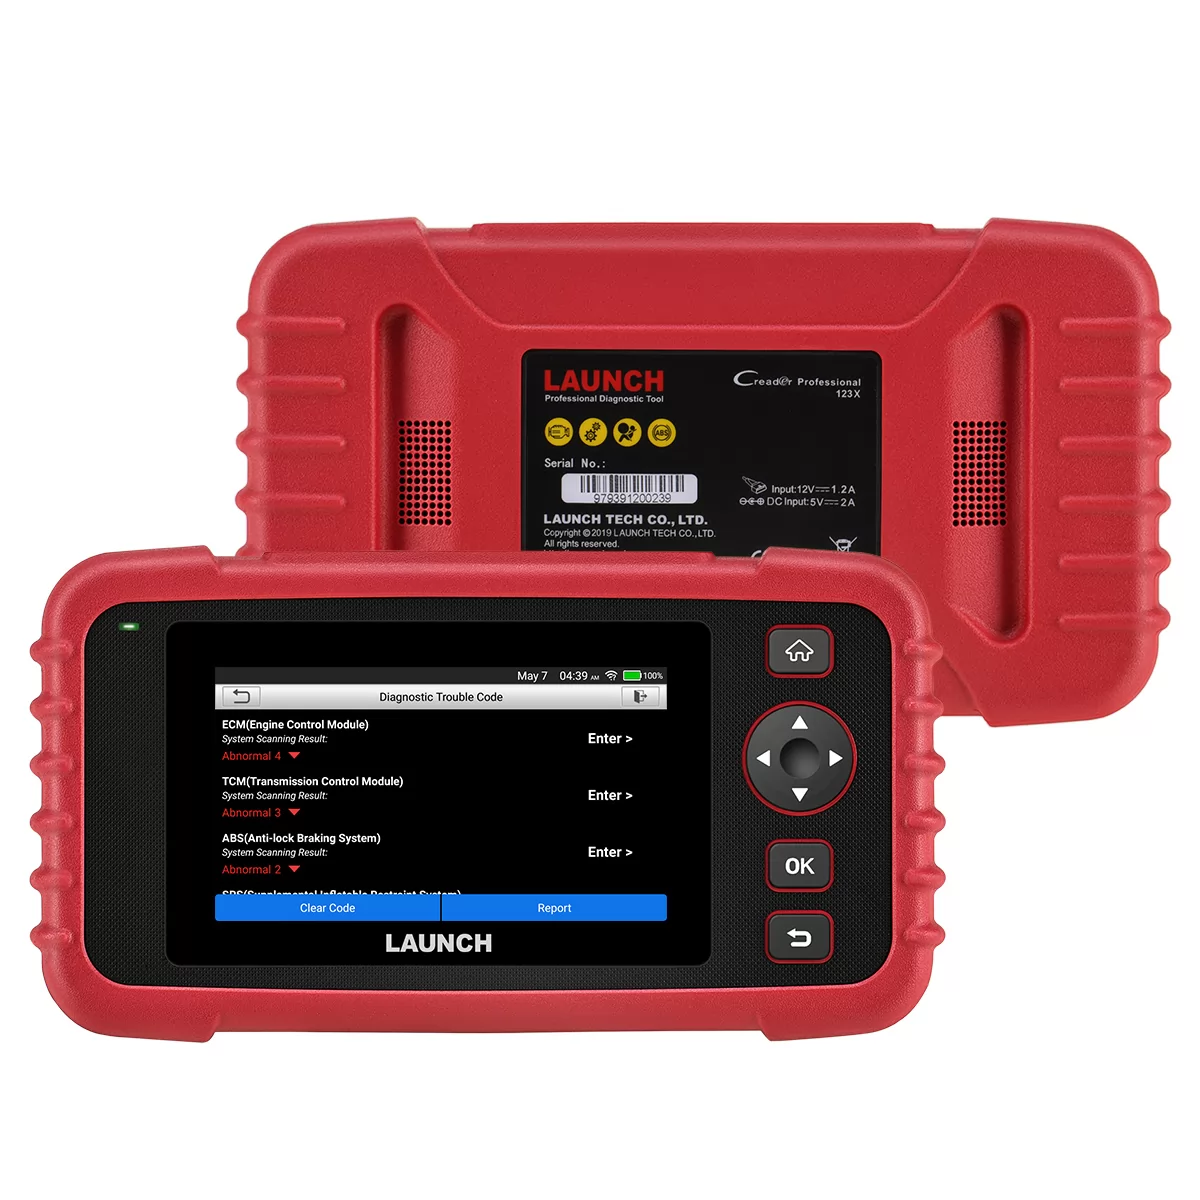 LAUNCH CRP123X OBD2 Code Reader for Engine Transmission ABS SRS Diagnostics  with AutoVIN Service Fre